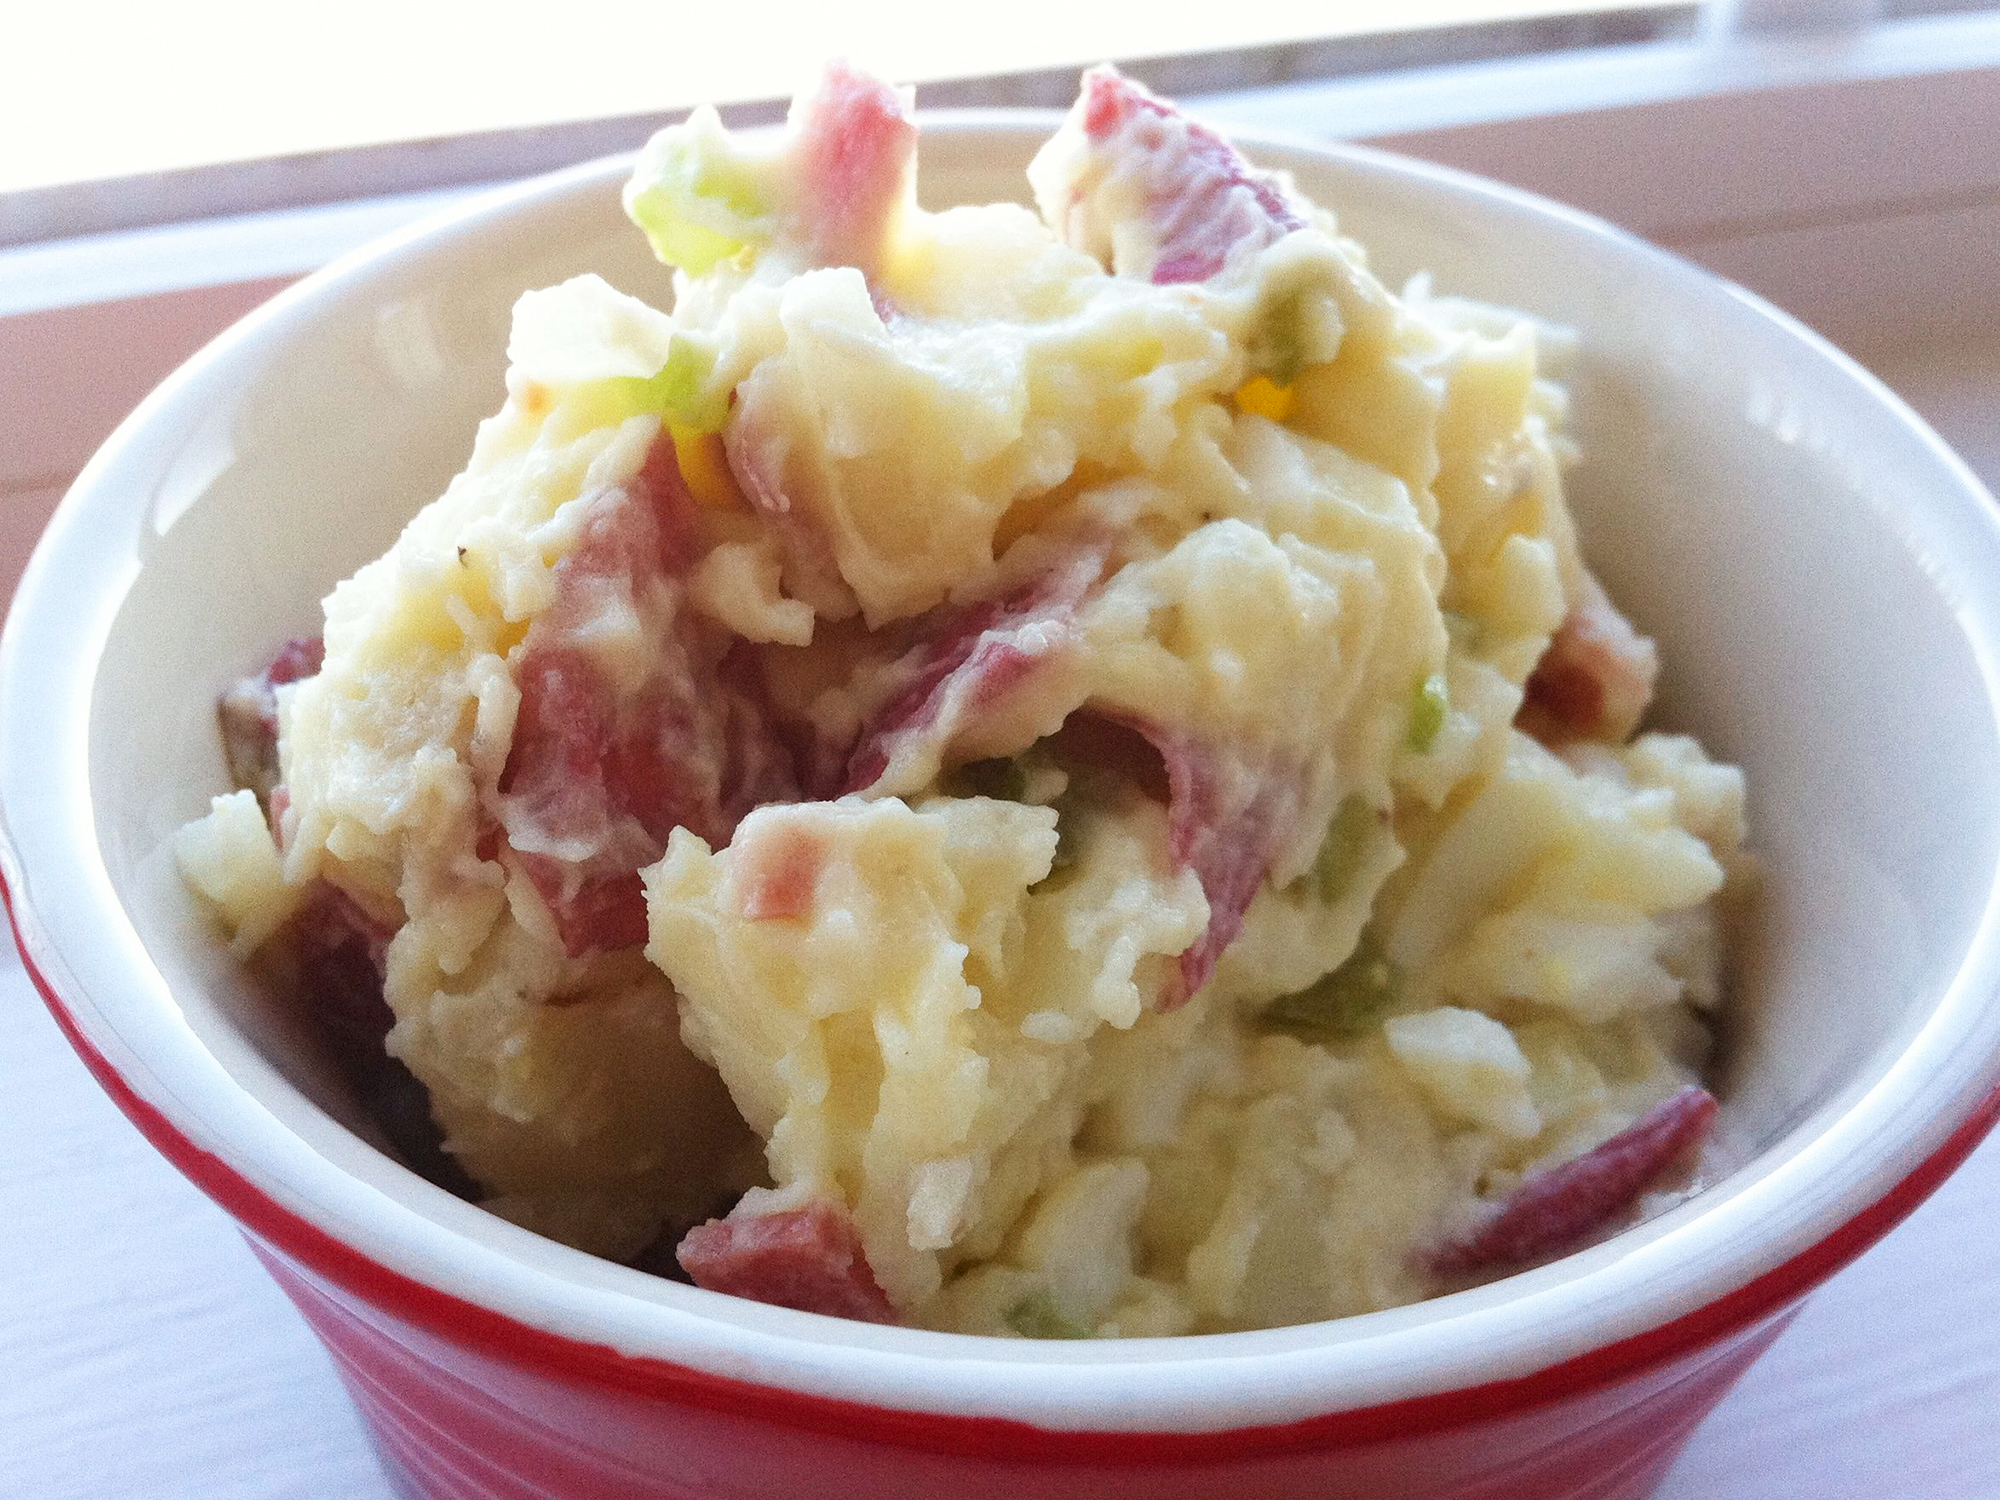 close up view of Roasted Red Potato Salad in a red and white bowl